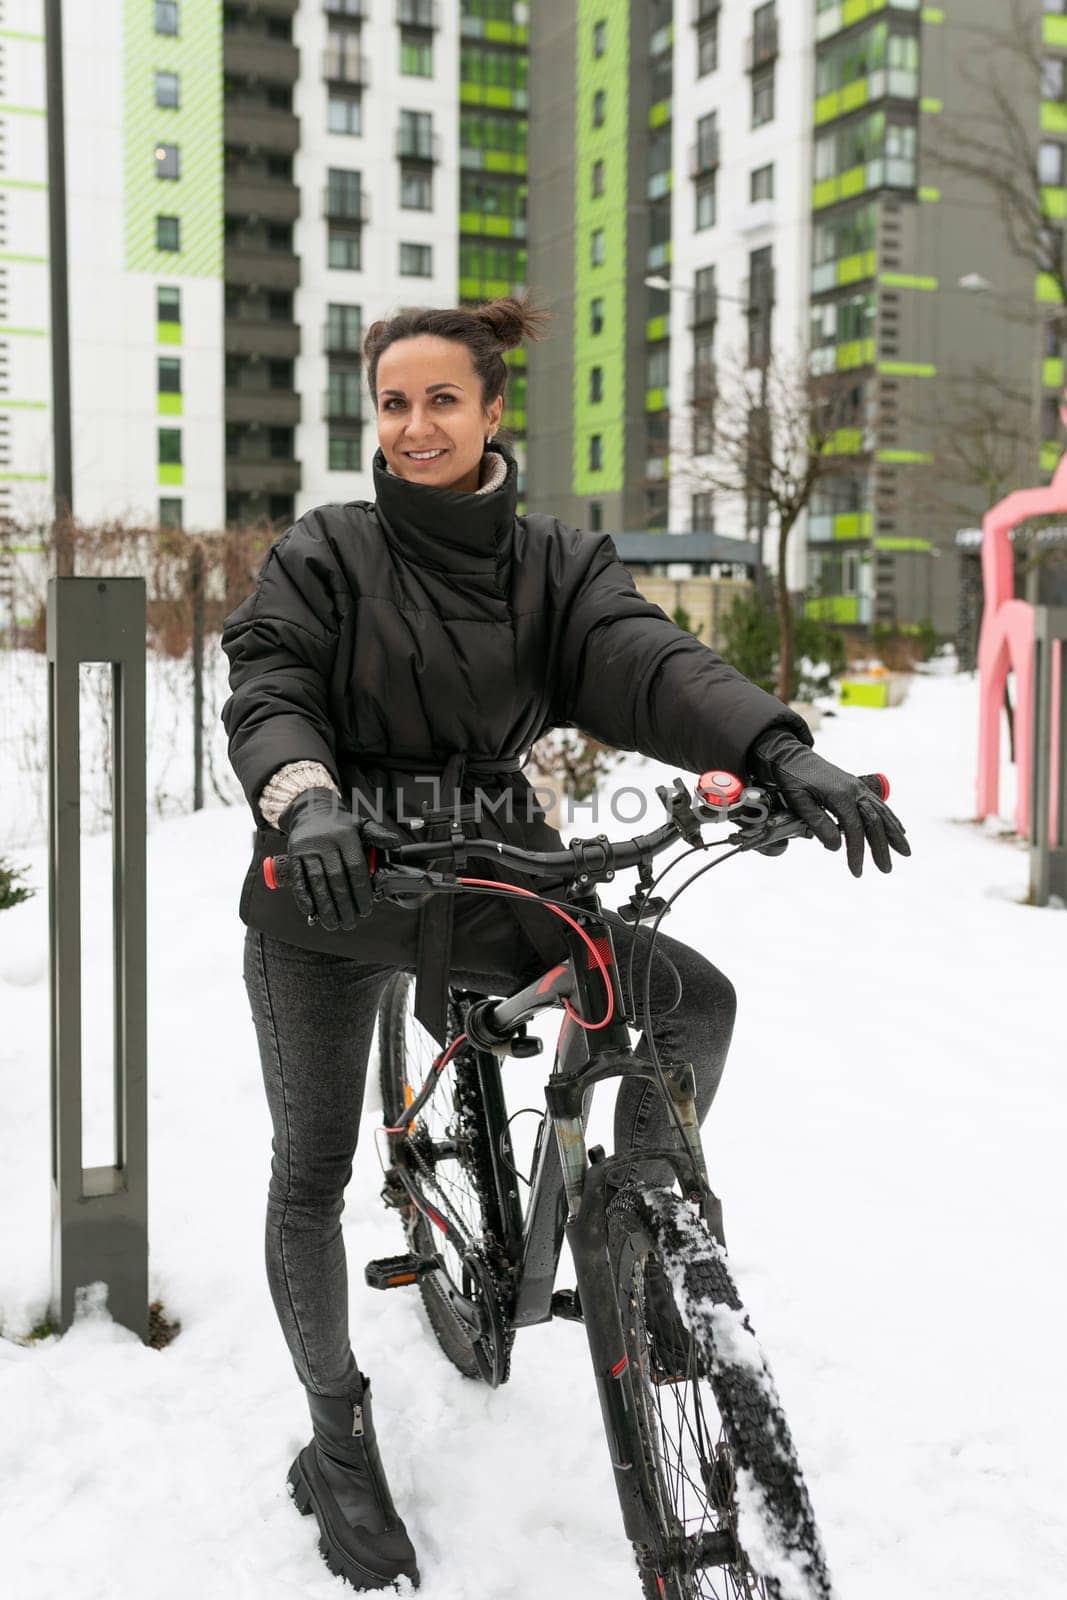 A young pretty woman in a winter jacket rented a bicycle and is riding it.